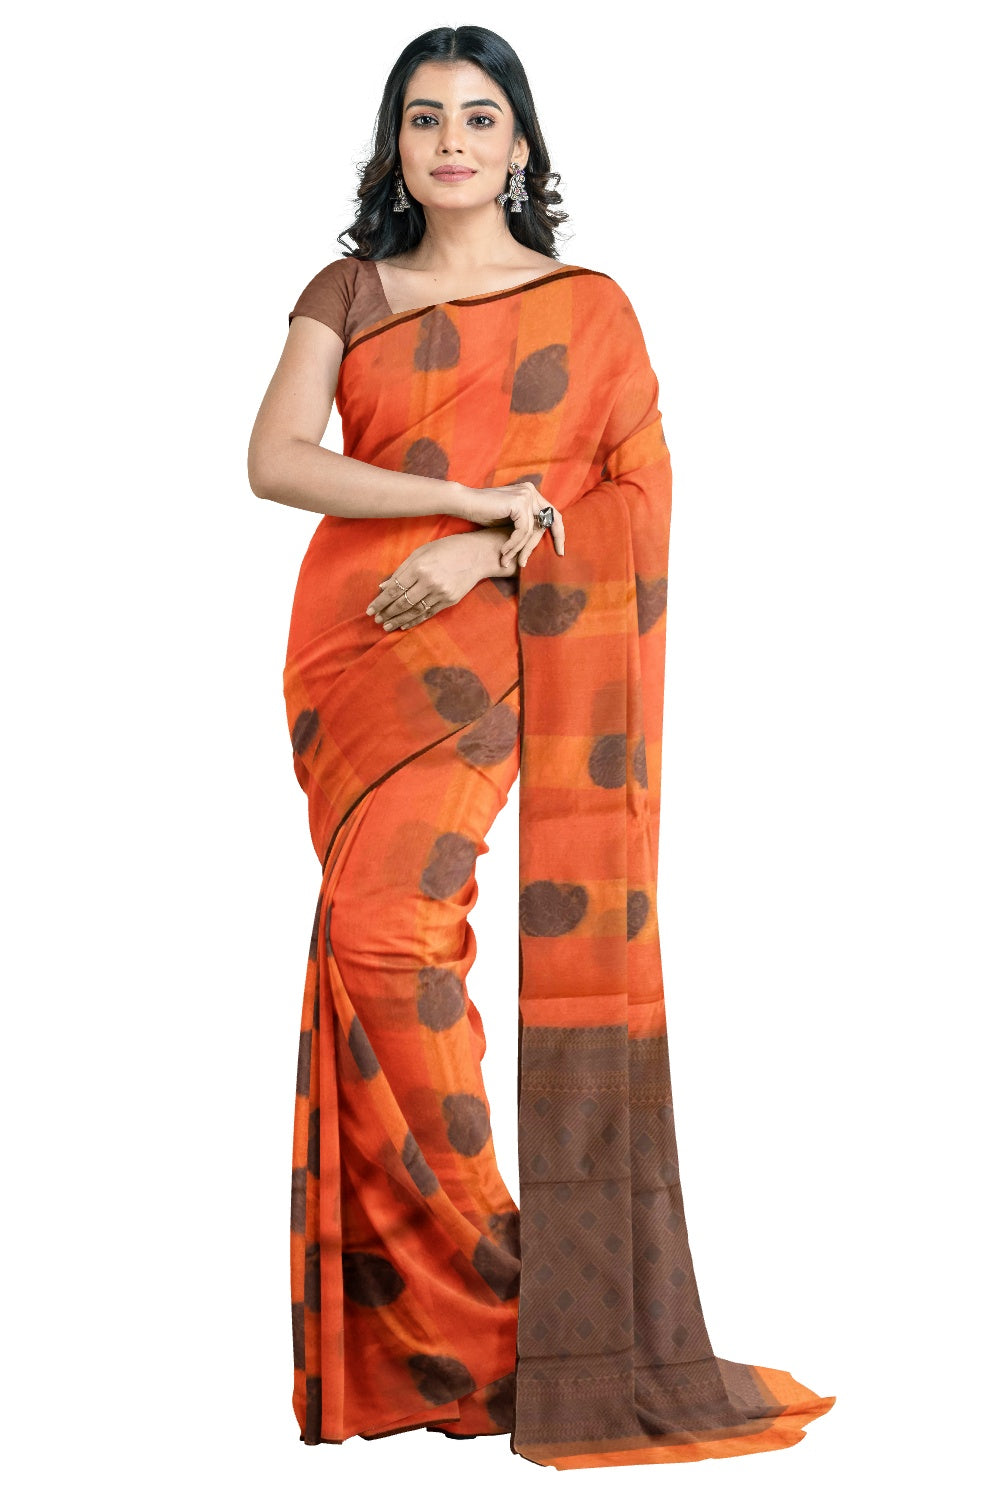 Southloom Sico Gadwal Semi Silk Saree in Orange with Paisley Motifs (Blouse Piece with Work)